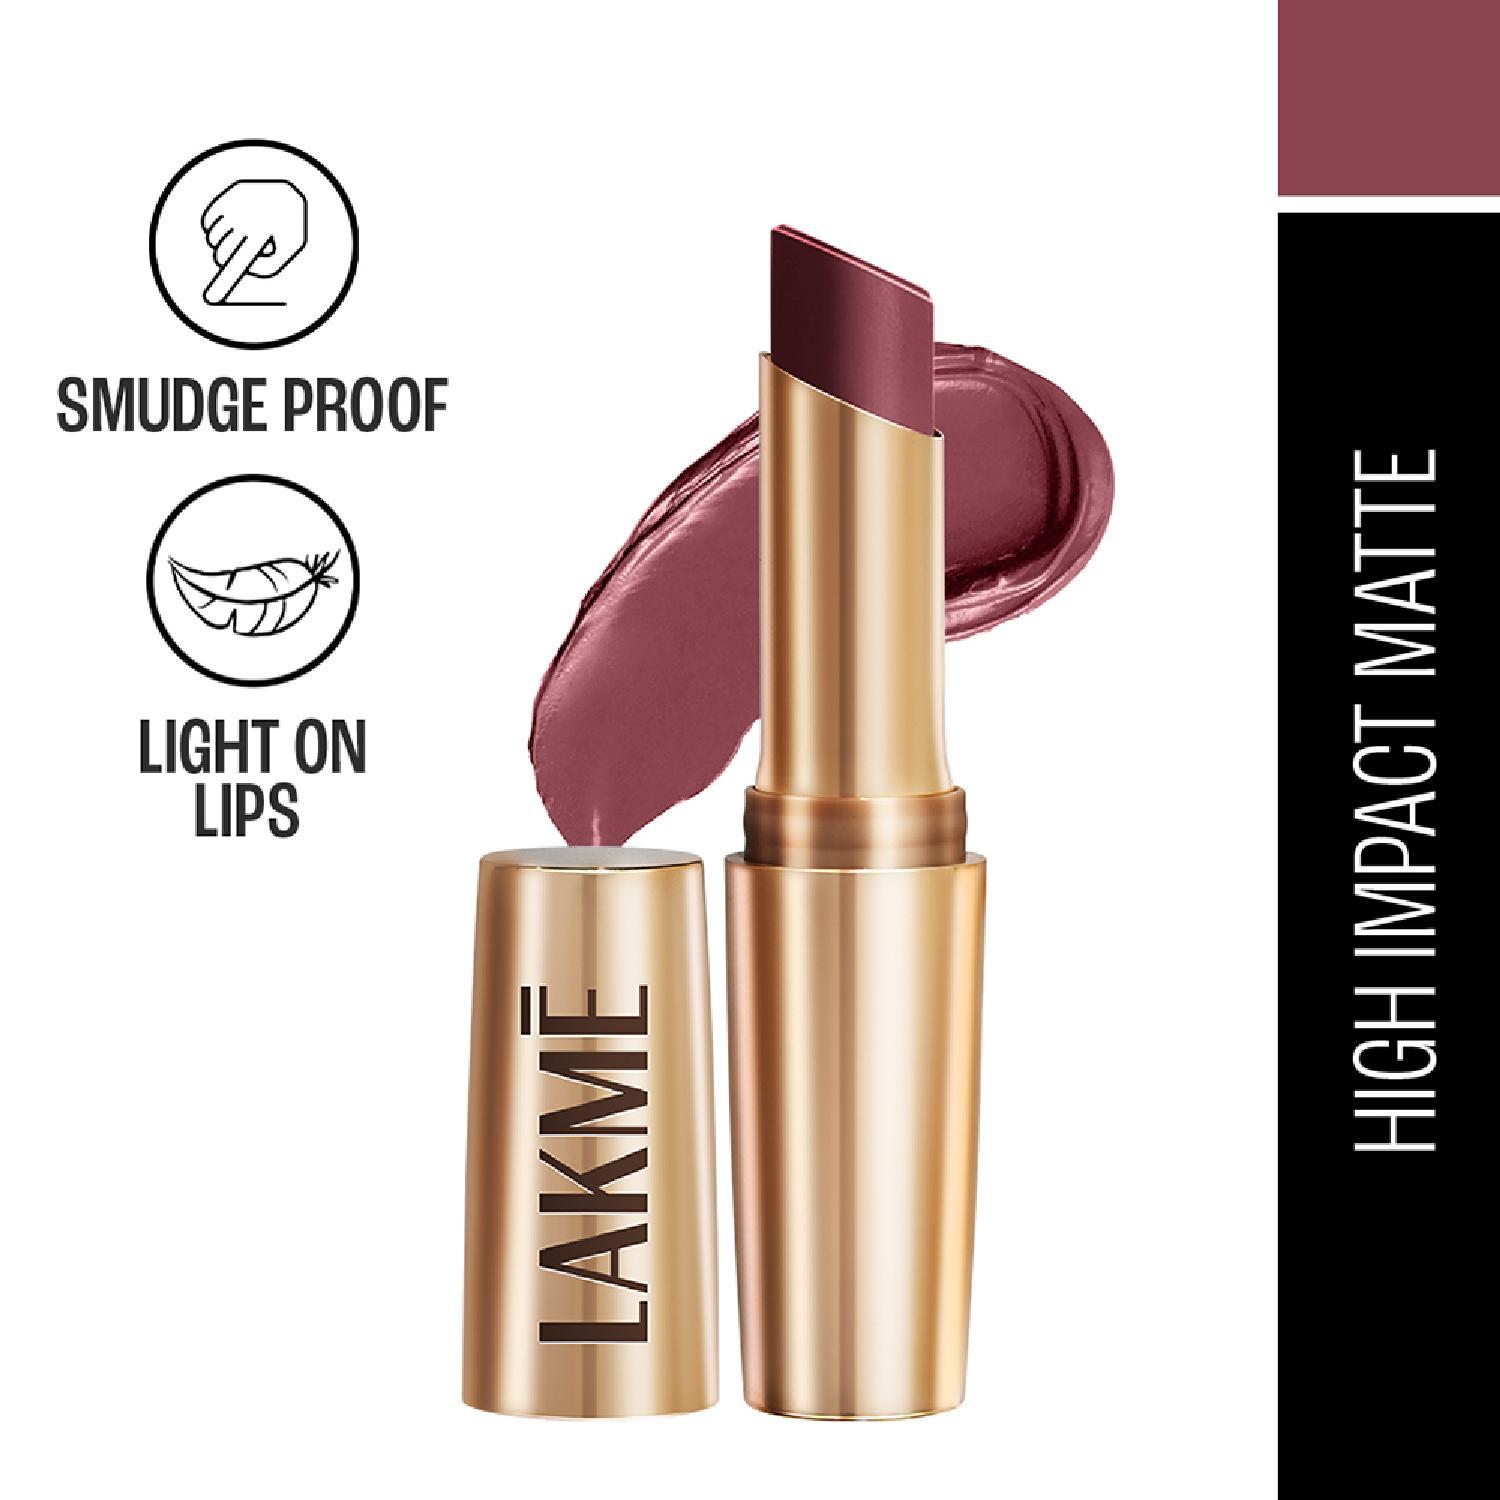 Lakme | Lakme 9 to 5 Powerplay Priming Matte Lipstick, Lasts 16hrs, Pink Party (3.6g)